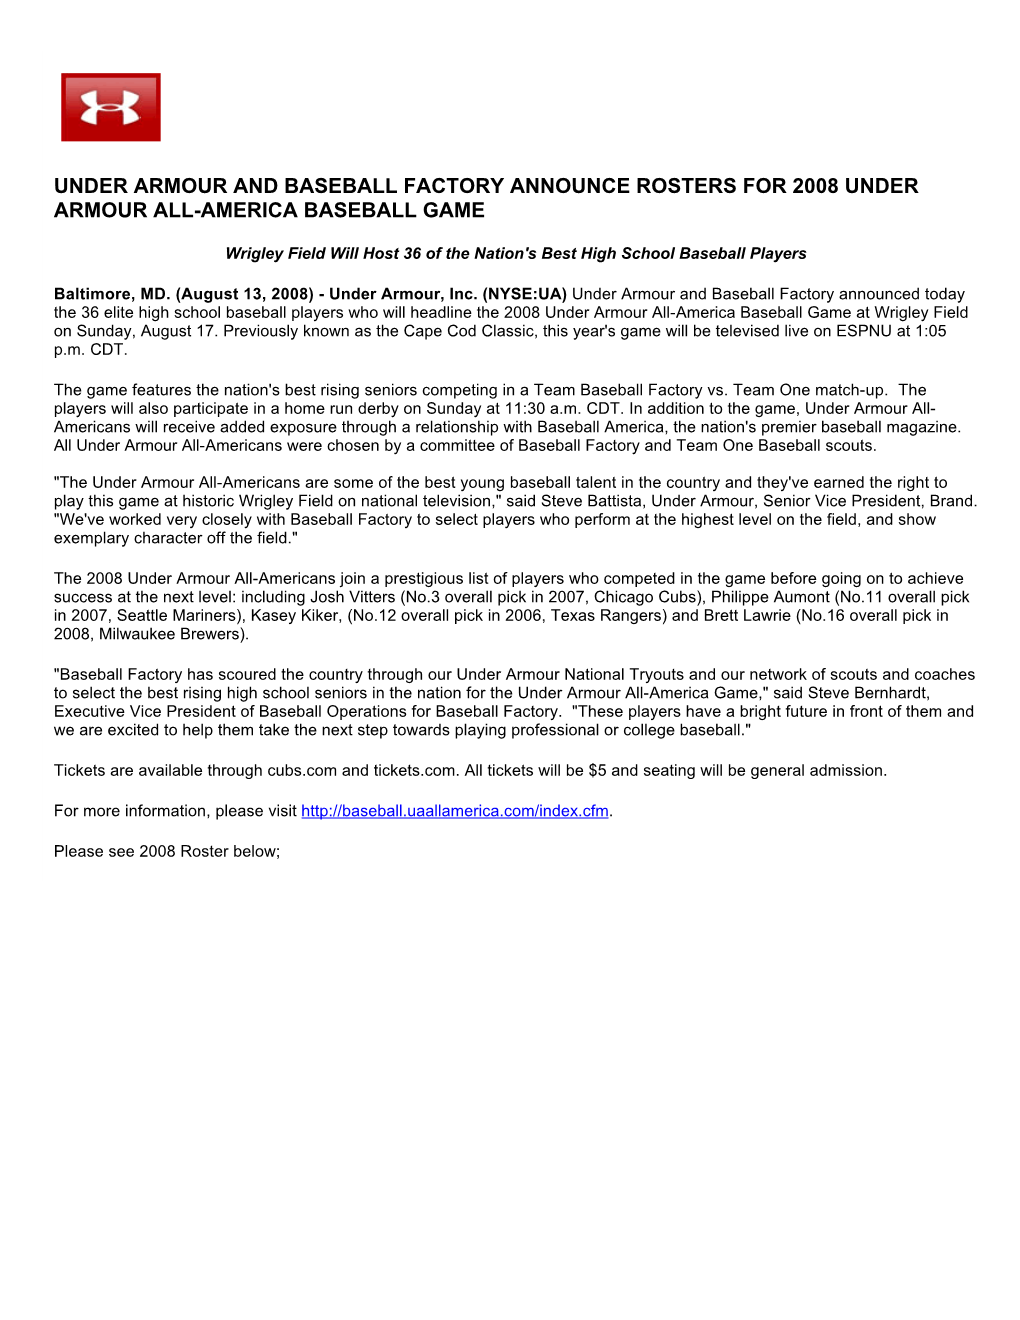 Under Armour and Baseball Factory Announce Rosters for 2008 Under Armour All-America Baseball Game